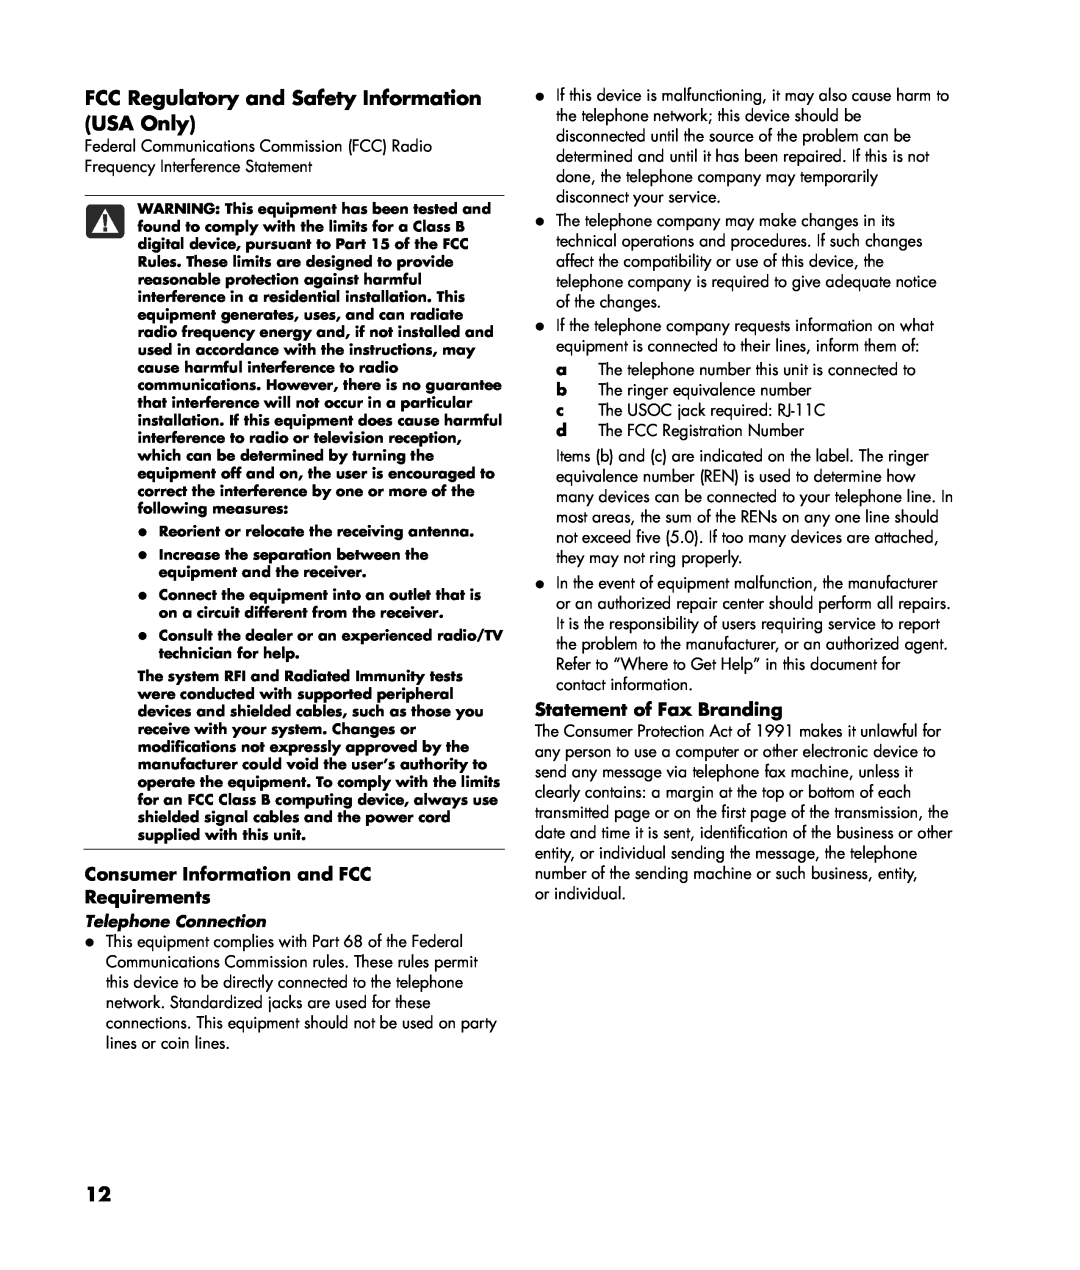 HP SR5450F FCC Regulatory and Safety Information USA Only, Consumer Information and FCC Requirements, Telephone Connection 